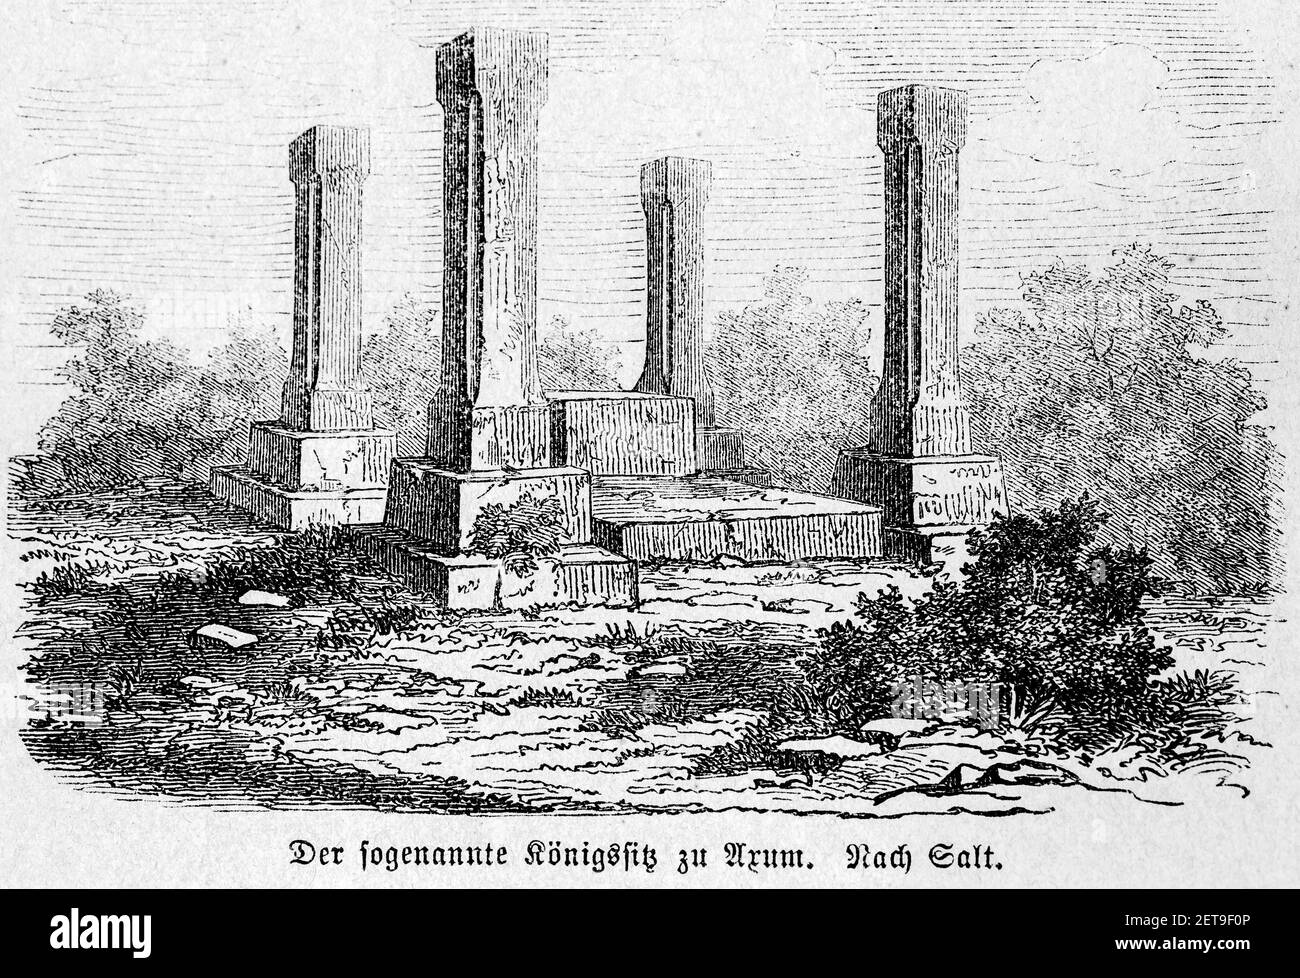 The King´s seat or throne in Axum, Abyssina, Ethiopia, East Africa, Dr. Richard Andree, Abessinien, Land und Volk, Leipzig 1869 Stock Photo